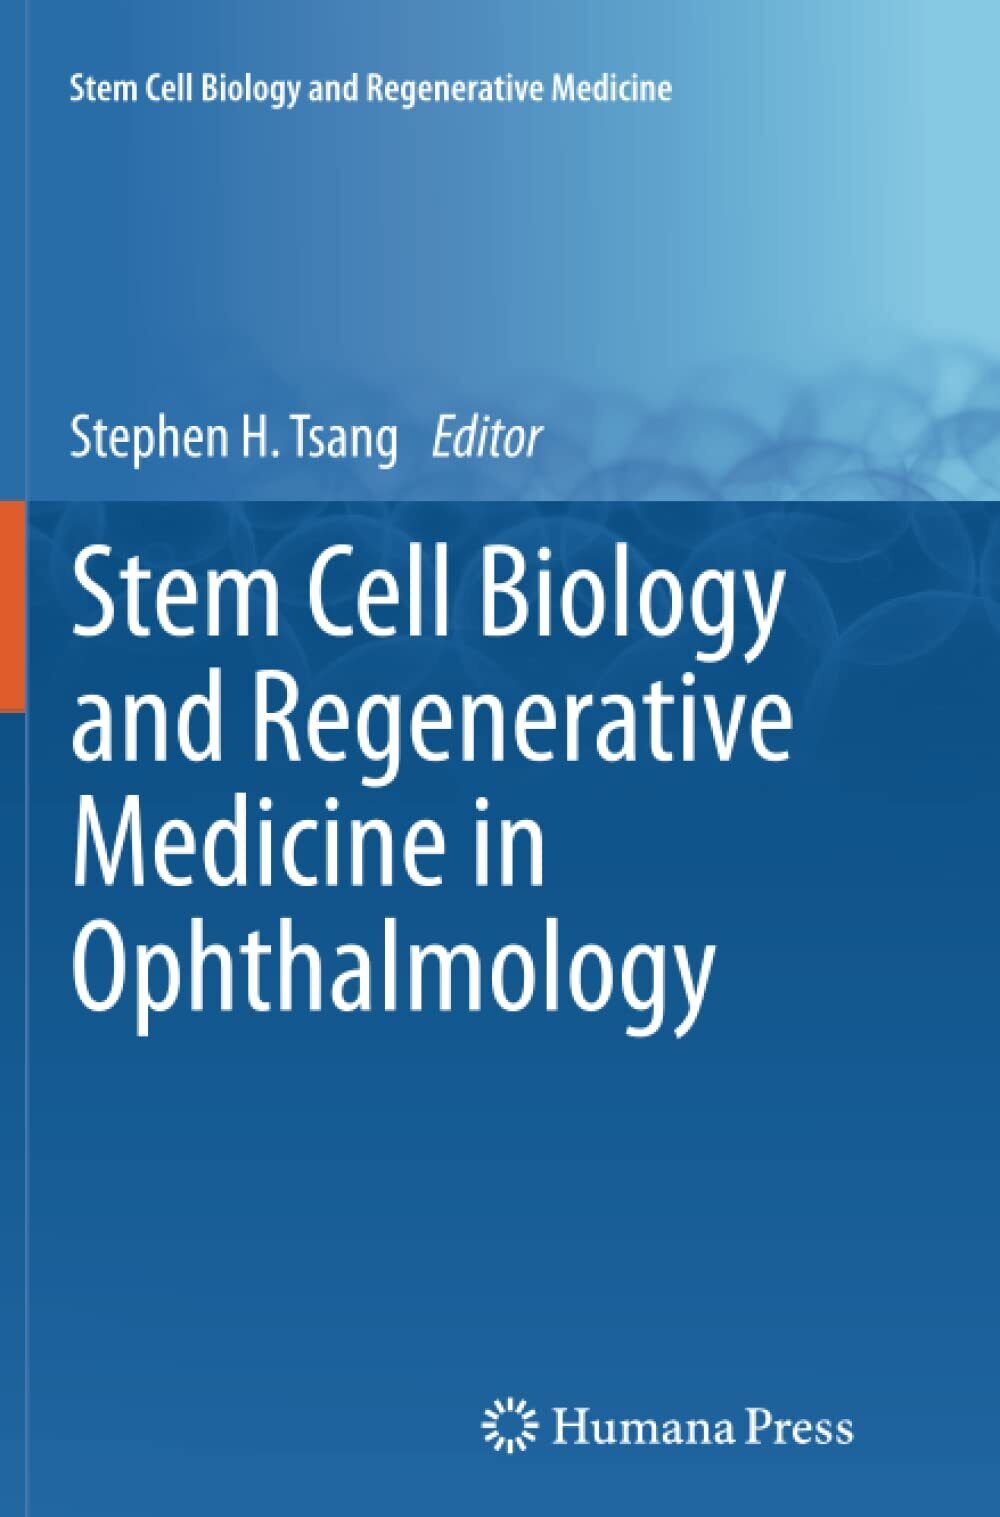 Stem Cell Biology and Regenerative Medicine in Ophthalmology - Humana, 2015